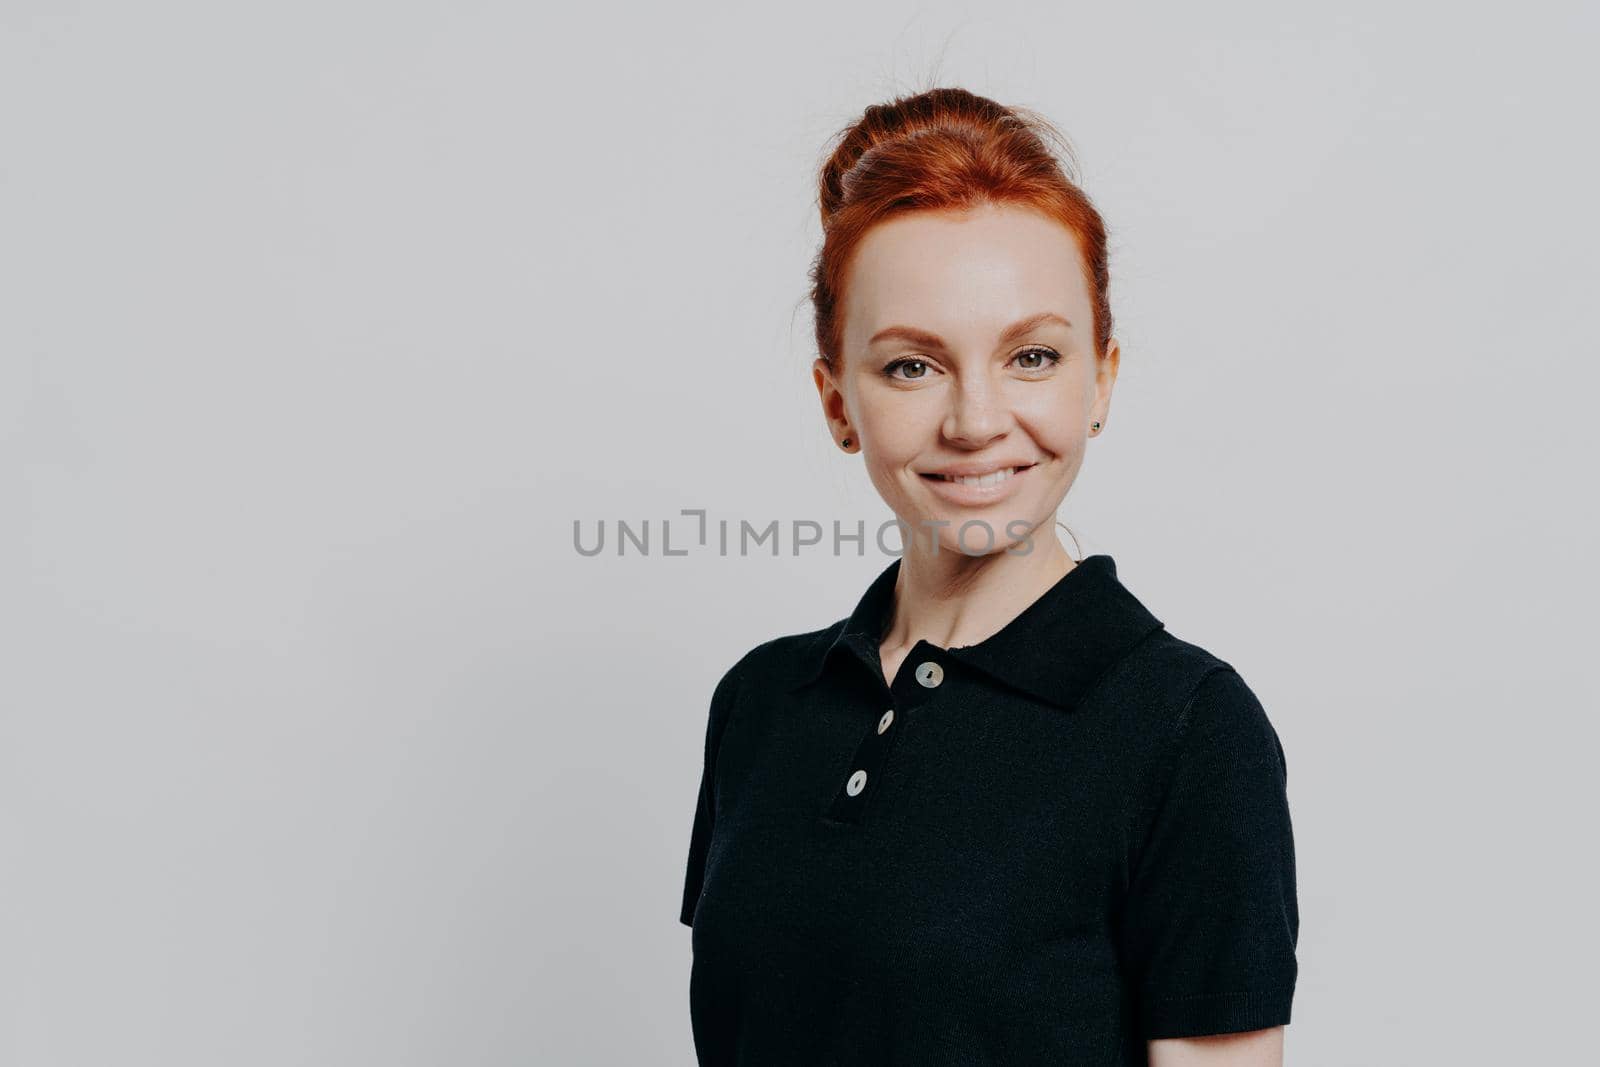 Gorgeous confident young 30s woman with red hair in bun posing isolated over grey studio background, dressed casually in black t-shirt, looking cheerfully at camera and expressing confidence